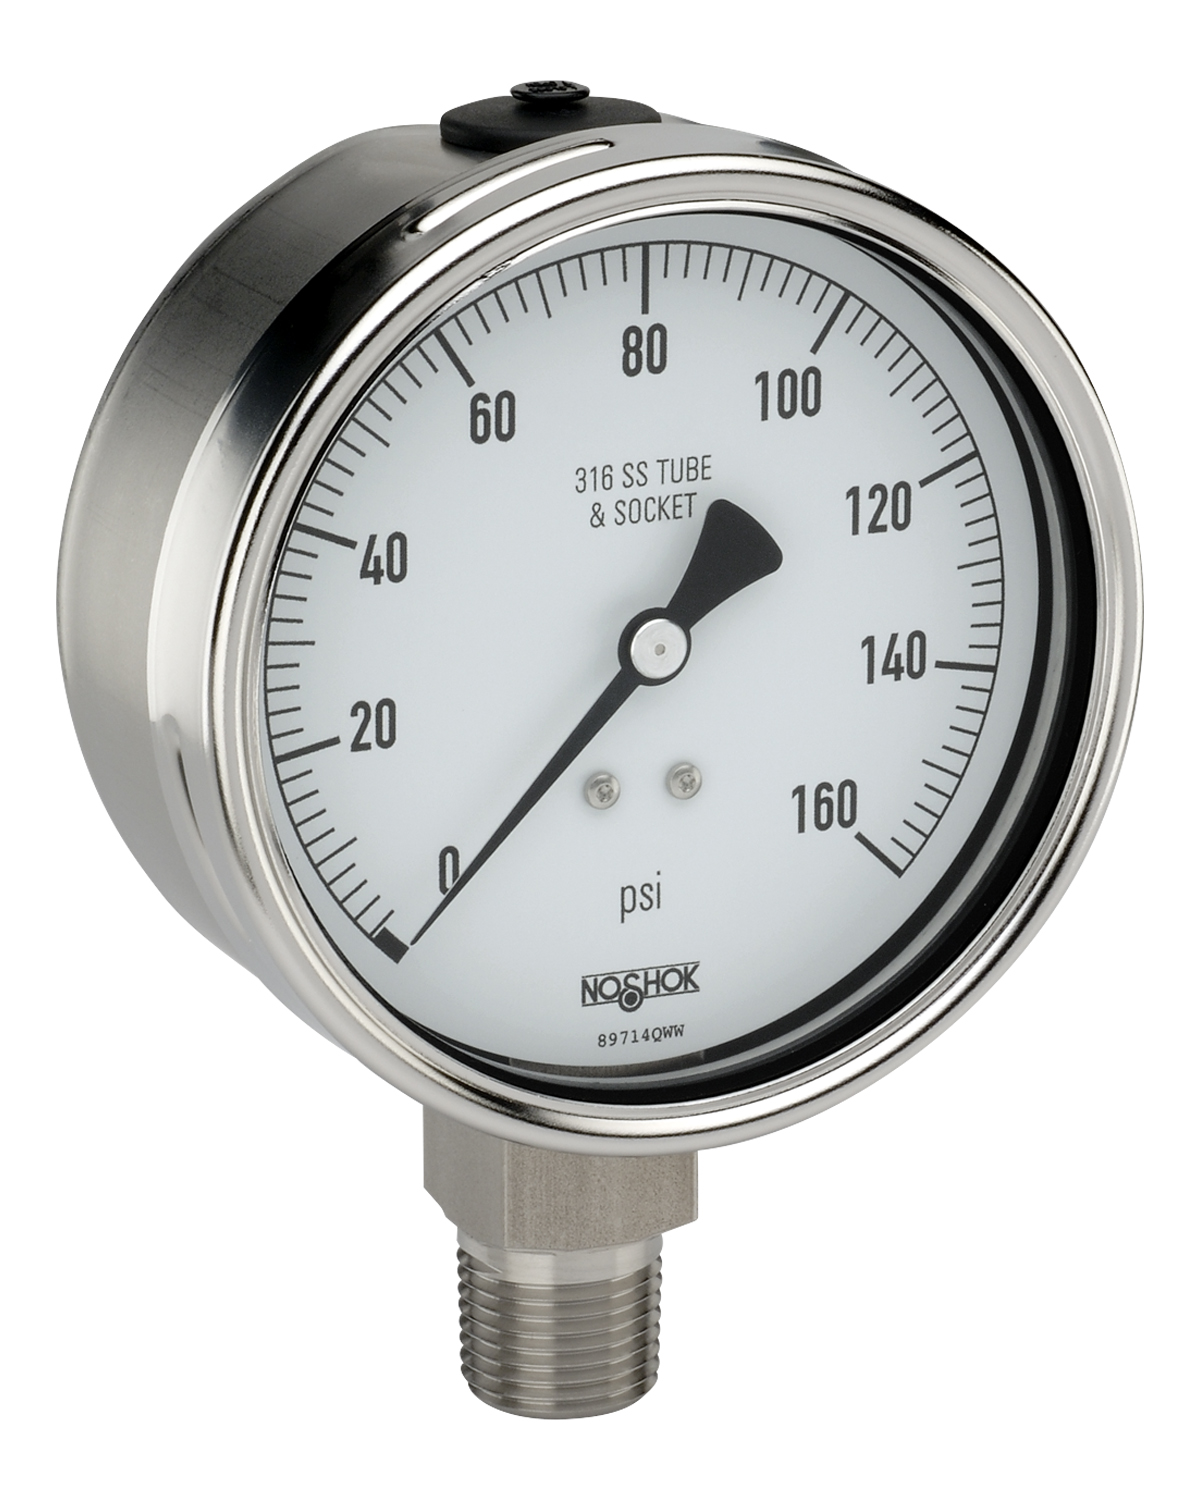 40-500-30-psi 400/500 Series All Stainless Steel Dry and Liquid Filled Pressure Gauges